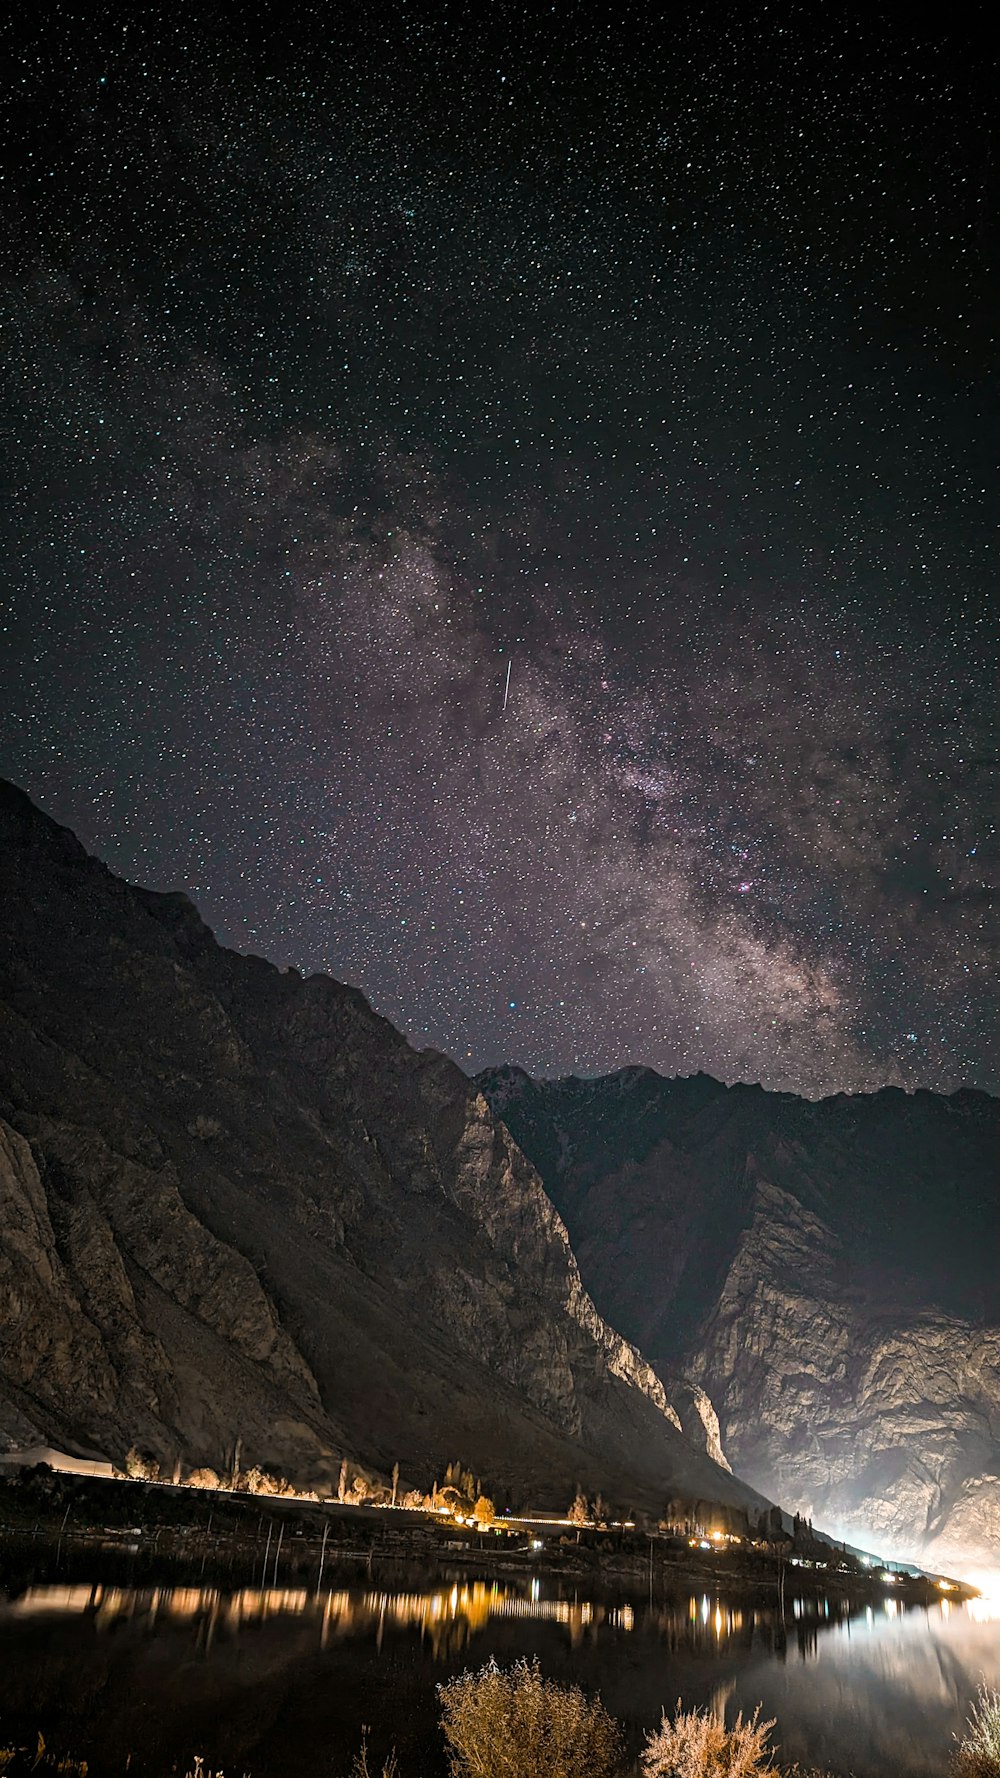 the night sky over a mountain range with a lake in the foreground